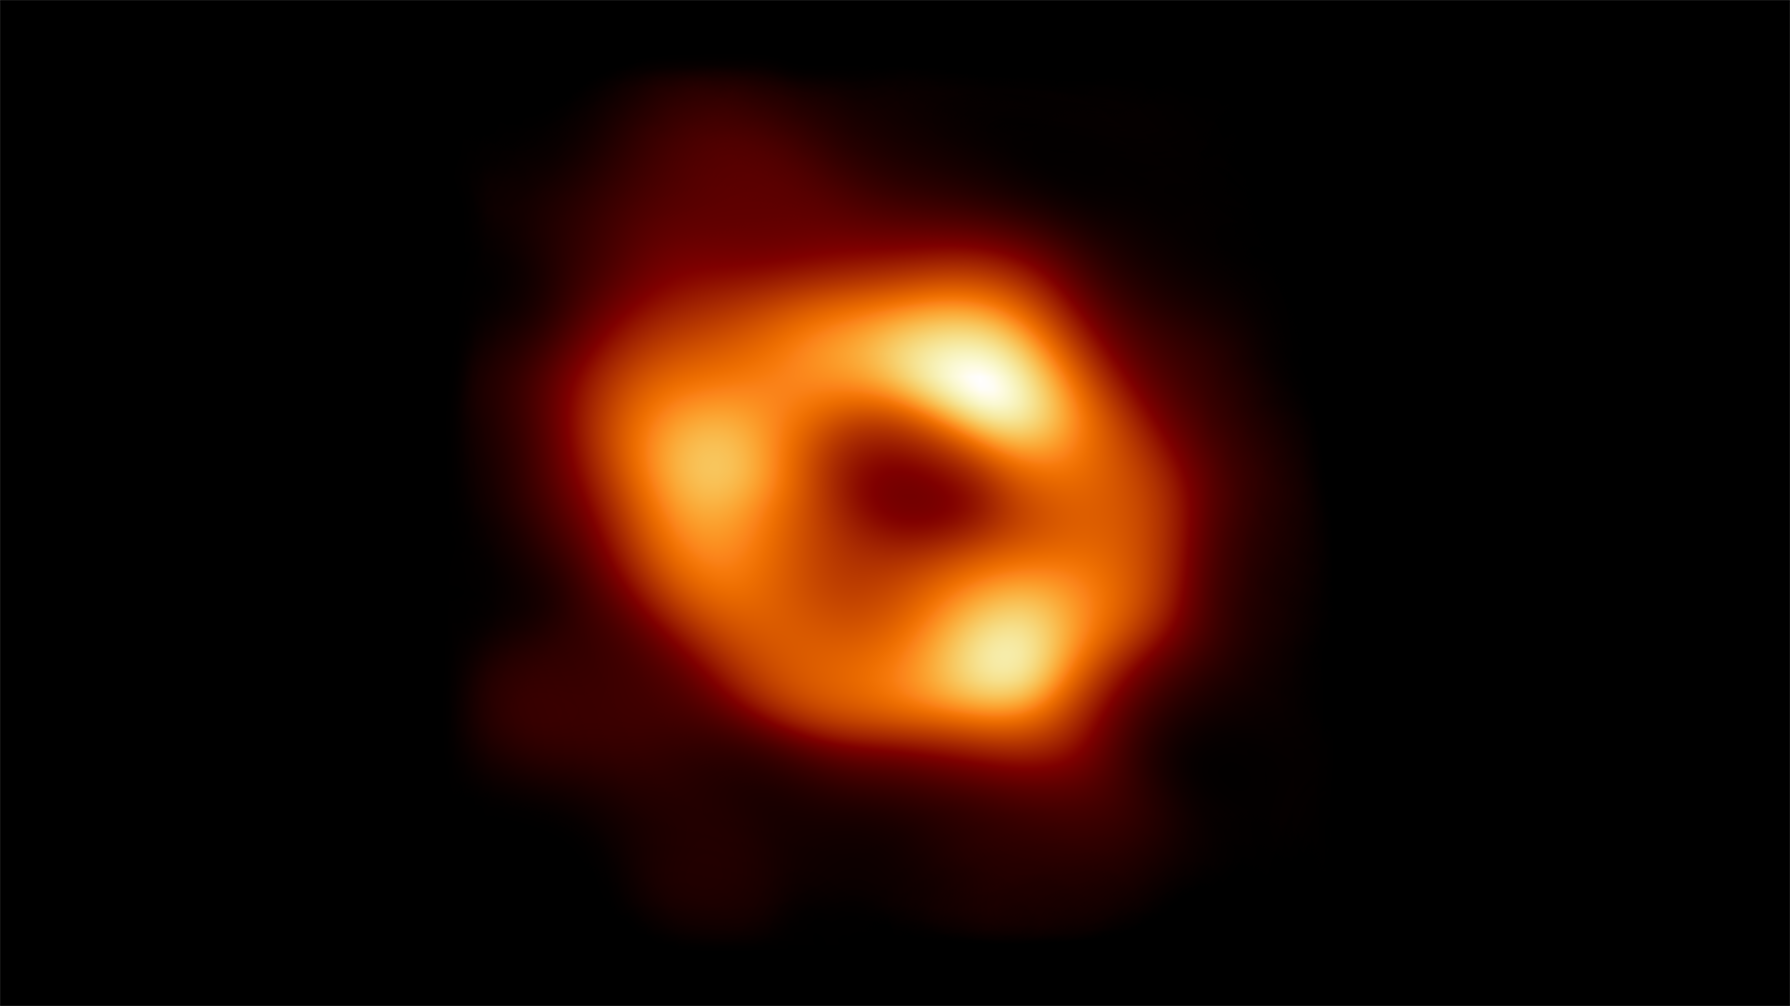 Illinois Physics Professor Charles Gammie and his team contributed to research that produced the first direct visual evidence of the Sagittarius A star, the supermassive black hole at the center of the Milky Way galaxy. Image courtesy Event Horizon Telescope collaboration